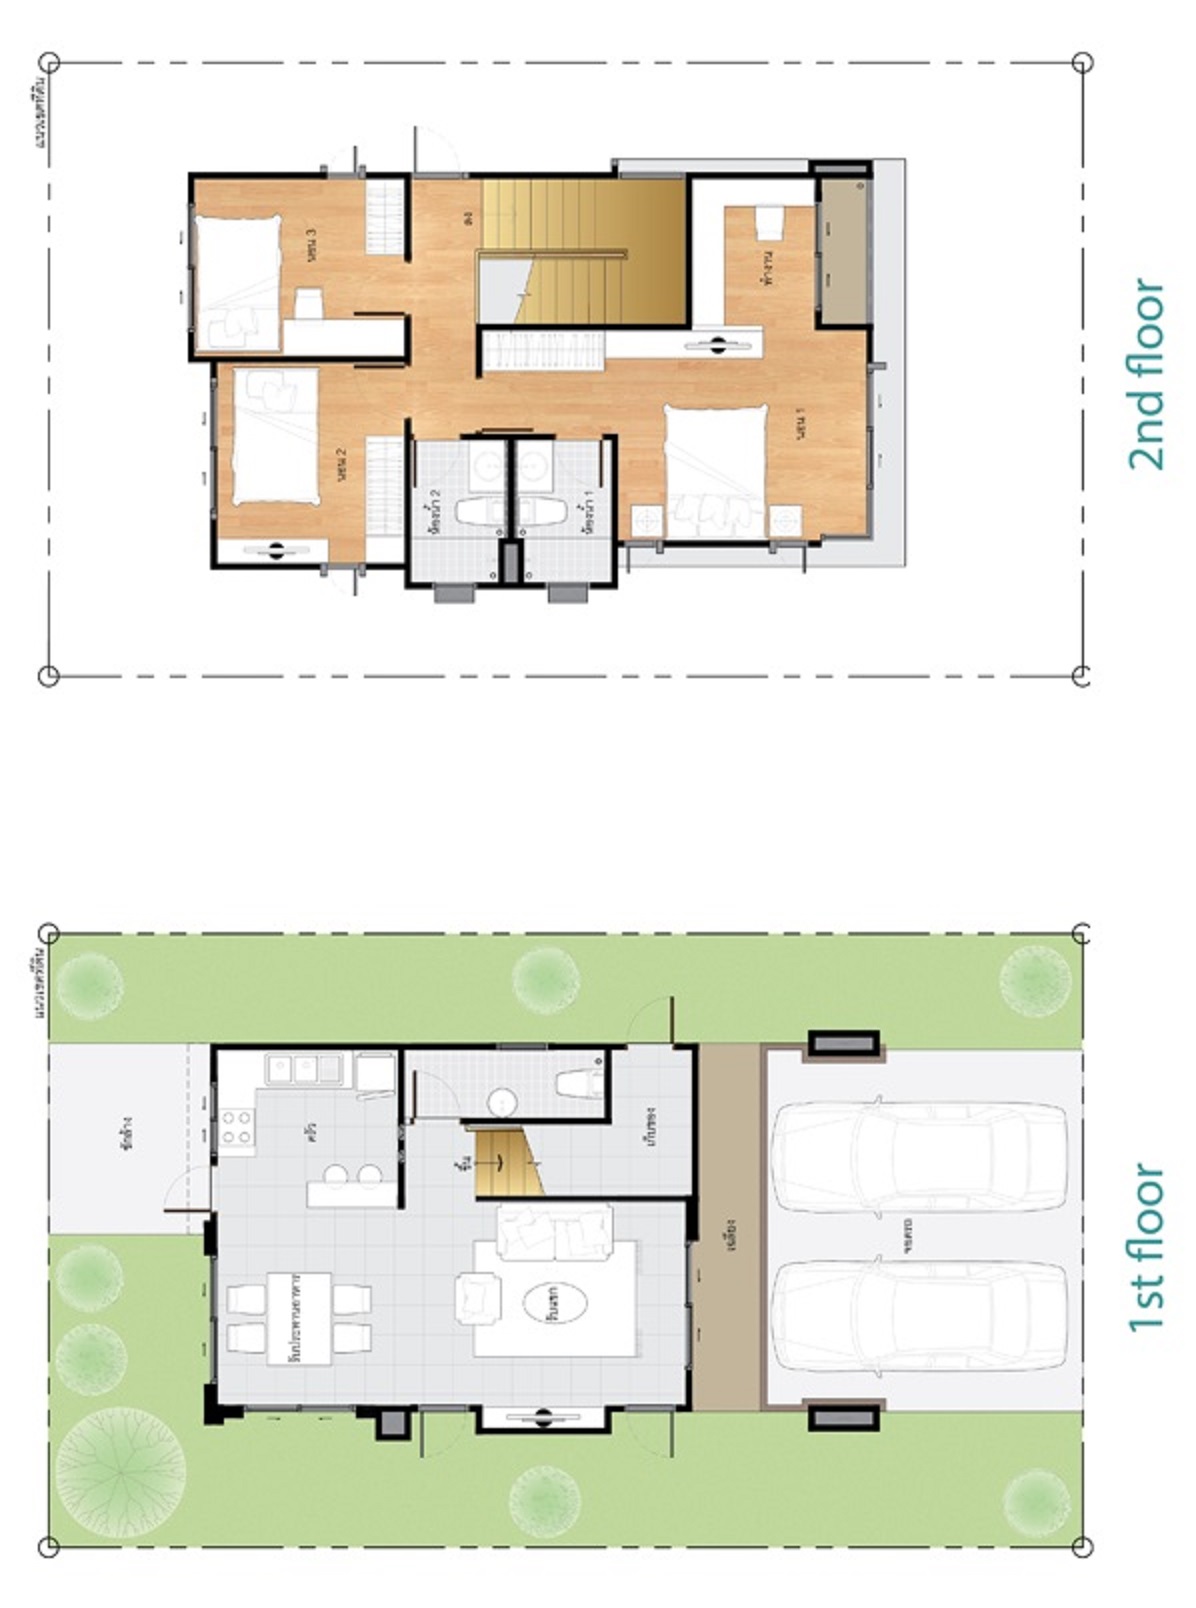 151 Sqm Home design  plan  with 3 bedrooms House  Plans 3D